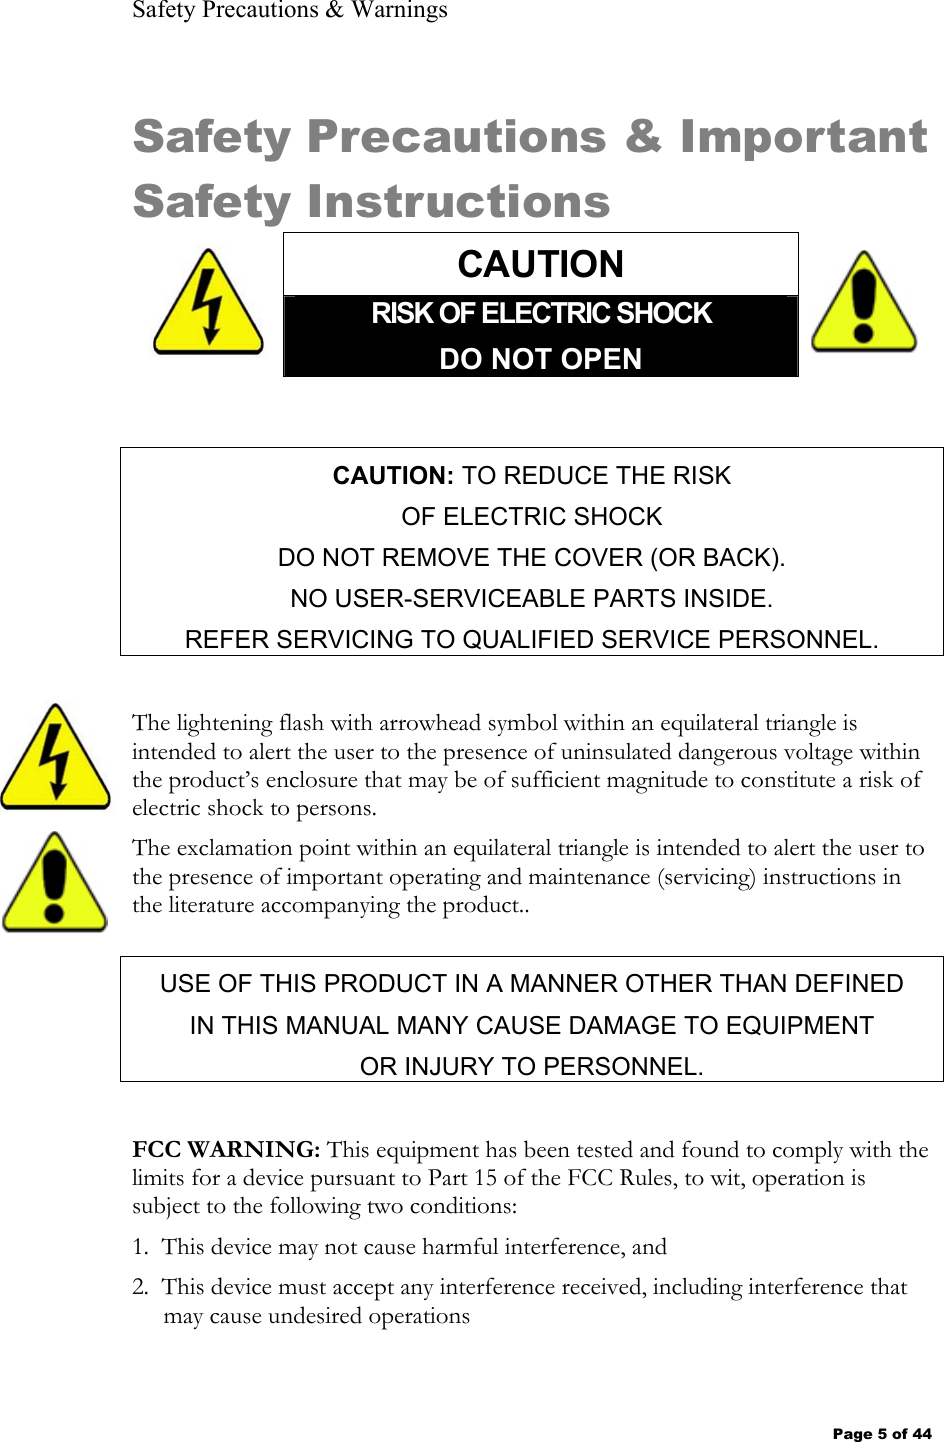 Safety Precautions &amp; Warnings Page 5 of 44 Safety Precautions &amp; Important Safety Instructions  CAUTION  RISK OF ELECTRIC SHOCK DO NOT OPEN  CAUTION: TO REDUCE THE RISK OF ELECTRIC SHOCK DO NOT REMOVE THE COVER (OR BACK). NO USER-SERVICEABLE PARTS INSIDE. REFER SERVICING TO QUALIFIED SERVICE PERSONNEL.  The lightening flash with arrowhead symbol within an equilateral triangle is intended to alert the user to the presence of uninsulated dangerous voltage within the product’s enclosure that may be of sufficient magnitude to constitute a risk of electric shock to persons. The exclamation point within an equilateral triangle is intended to alert the user to the presence of important operating and maintenance (servicing) instructions in the literature accompanying the product.. USE OF THIS PRODUCT IN A MANNER OTHER THAN DEFINED  IN THIS MANUAL MANY CAUSE DAMAGE TO EQUIPMENT  OR INJURY TO PERSONNEL.  FCC WARNING: This equipment has been tested and found to comply with the limits for a device pursuant to Part 15 of the FCC Rules, to wit, operation is subject to the following two conditions:  1.  This device may not cause harmful interference, and 2.  This device must accept any interference received, including interference that may cause undesired operations 